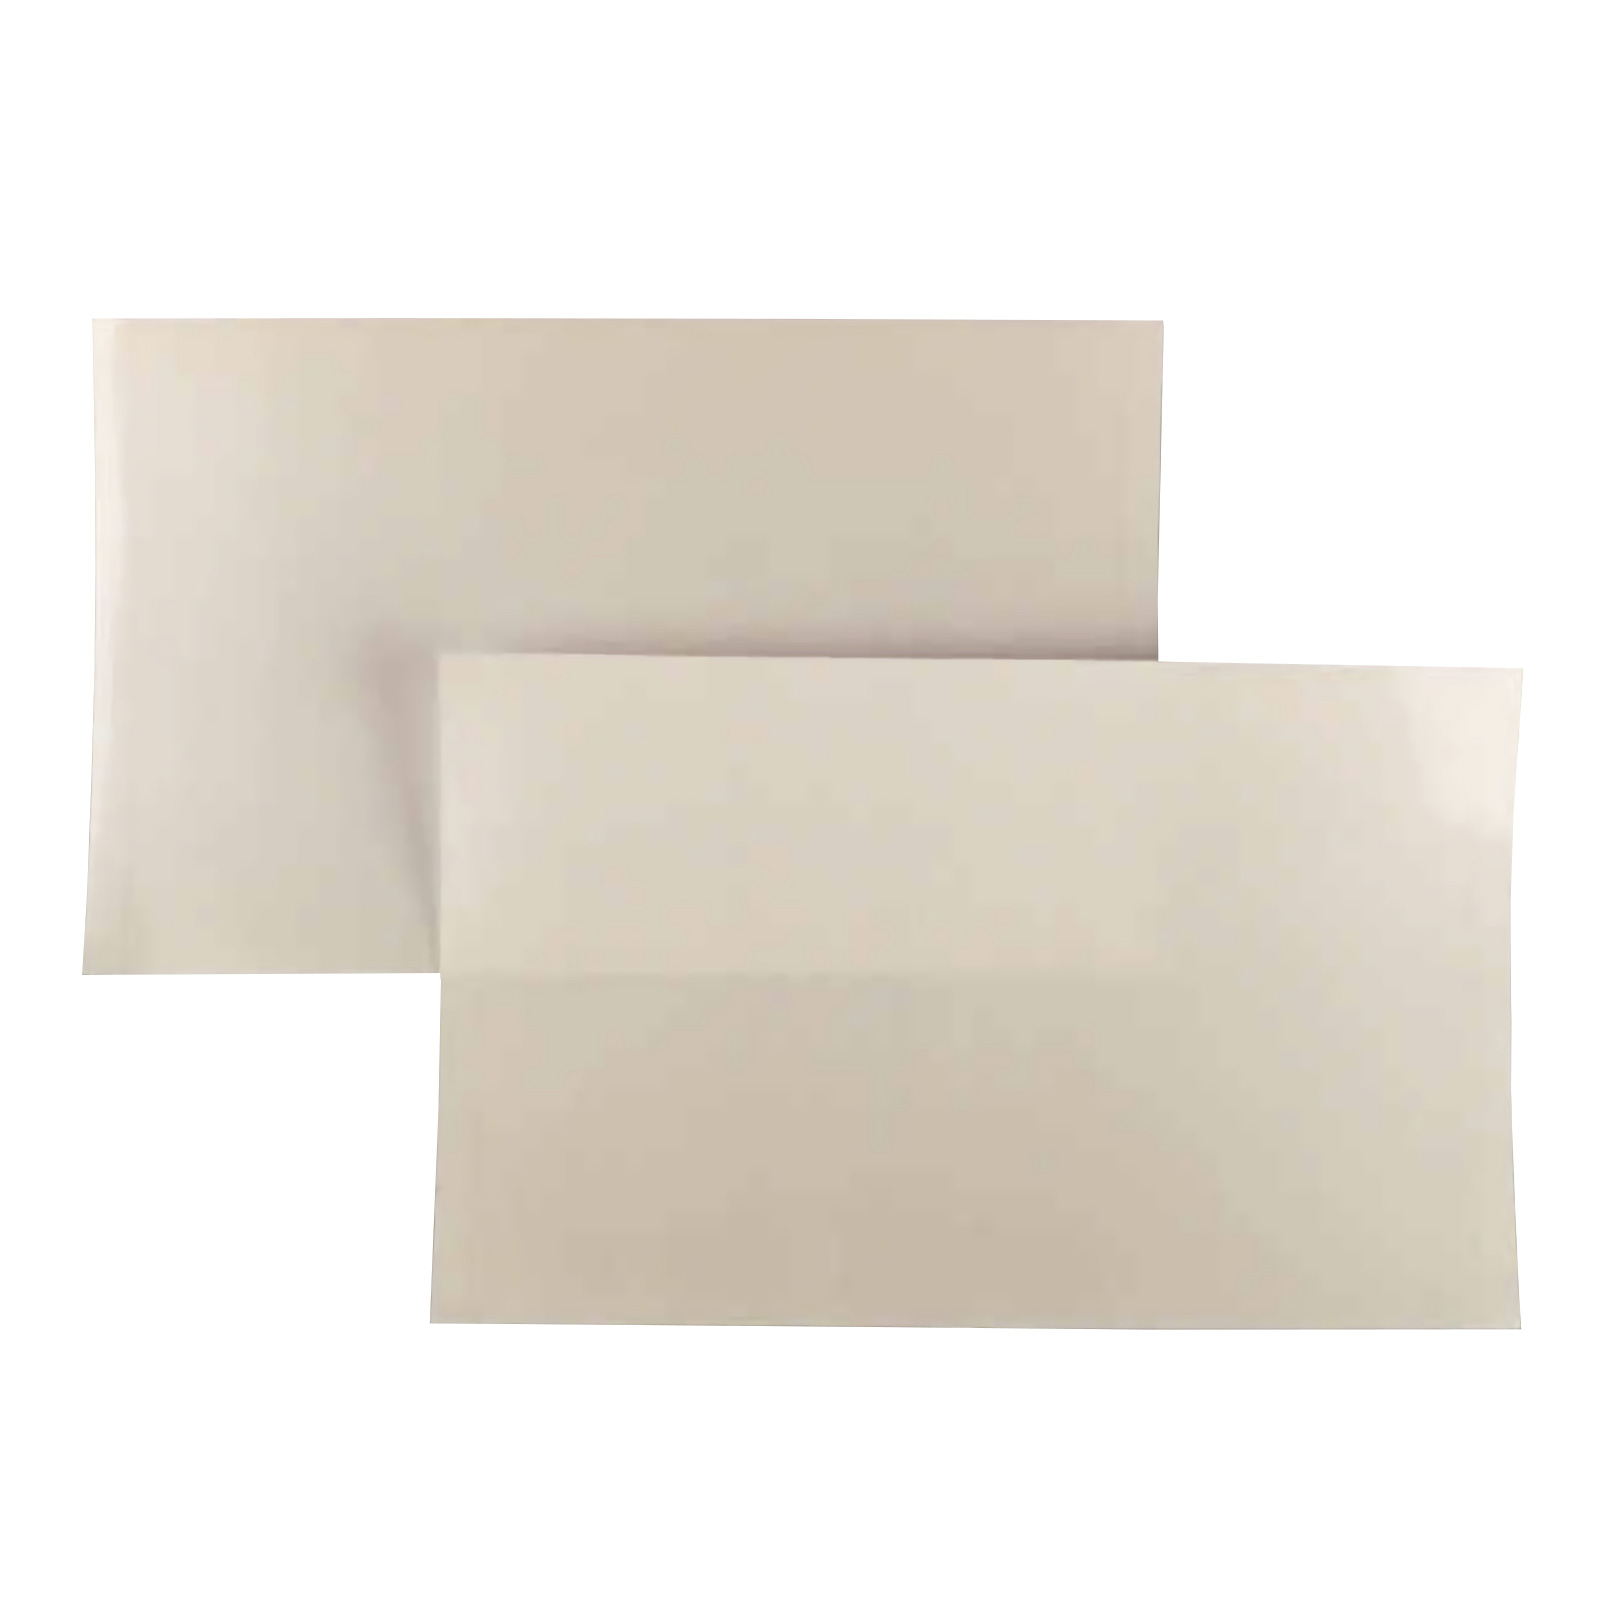 ADAMAS BETA Self Adhesive Milky White Avoid-Light Moderate Viscosity Sealing Plate Film Laboratory Sealing Membrane For Microplate/PCR Plate